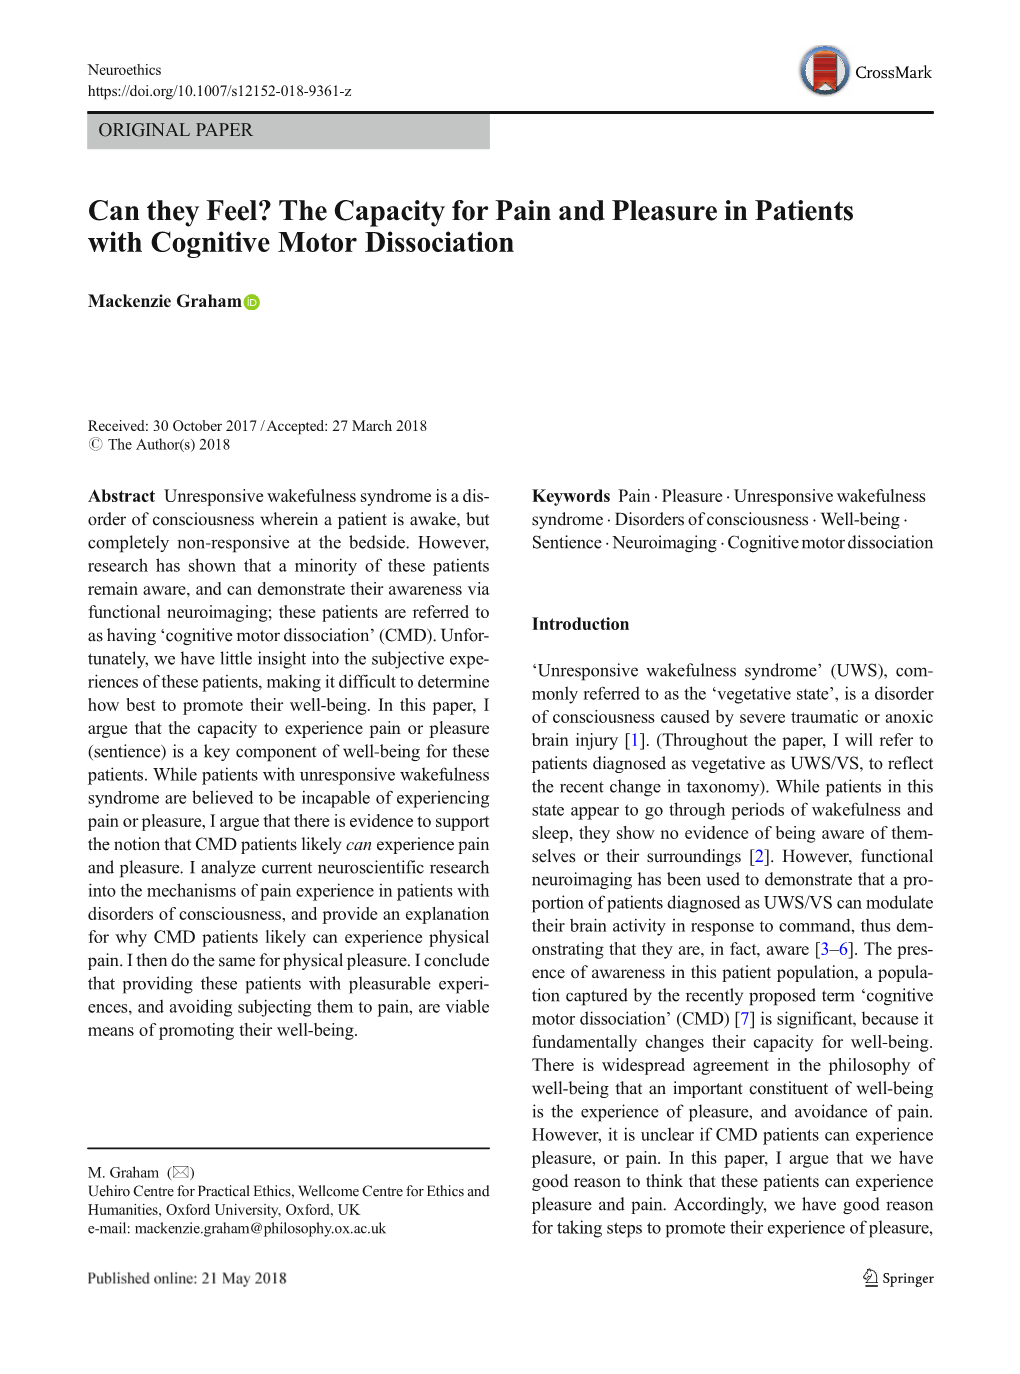 Can They Feel? the Capacity for Pain and Pleasure in Patients with Cognitive Motor Dissociation